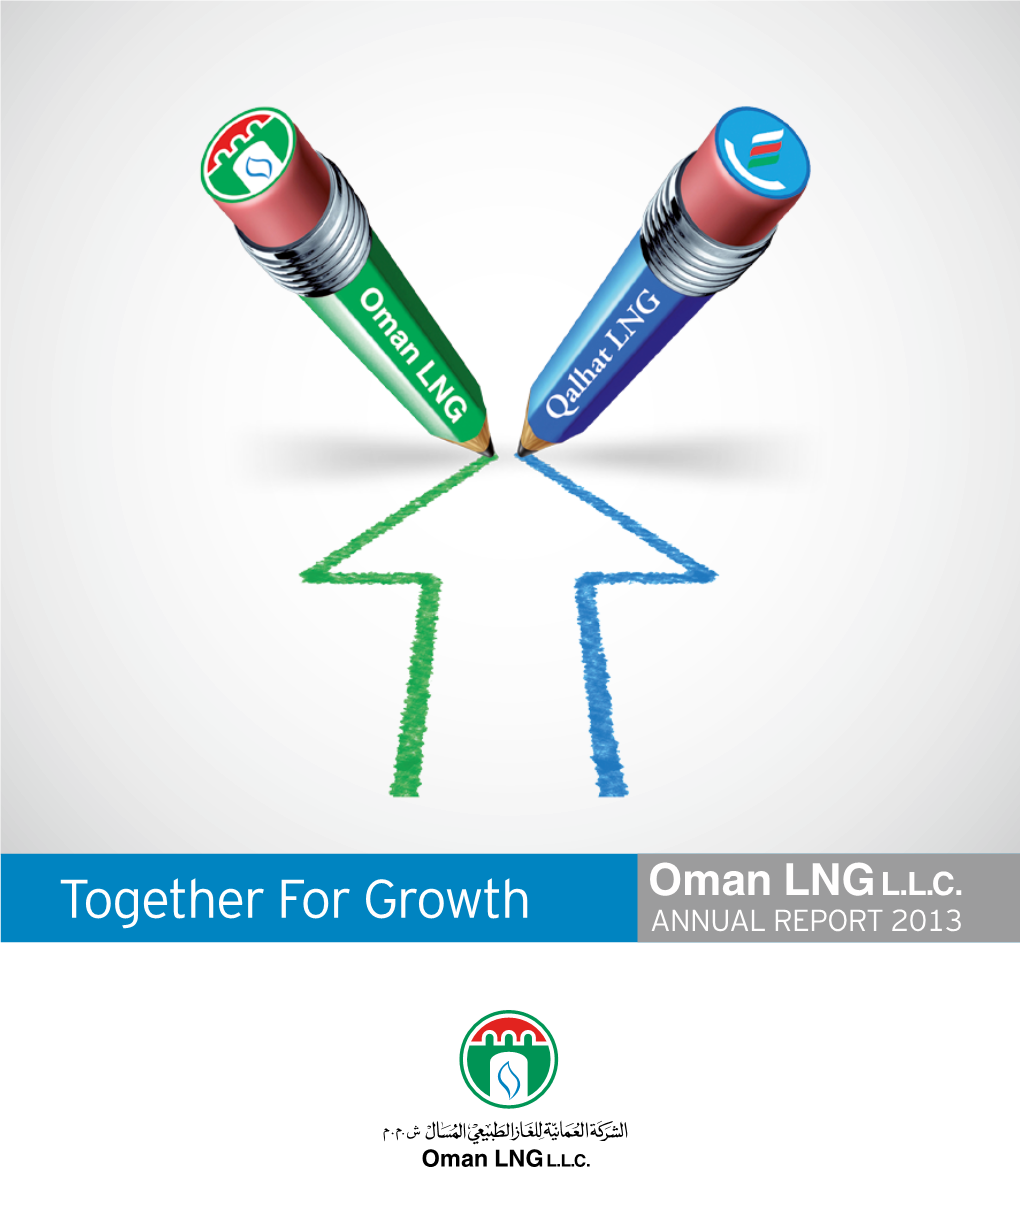 Together for Growth ANNUAL REPORT 2013